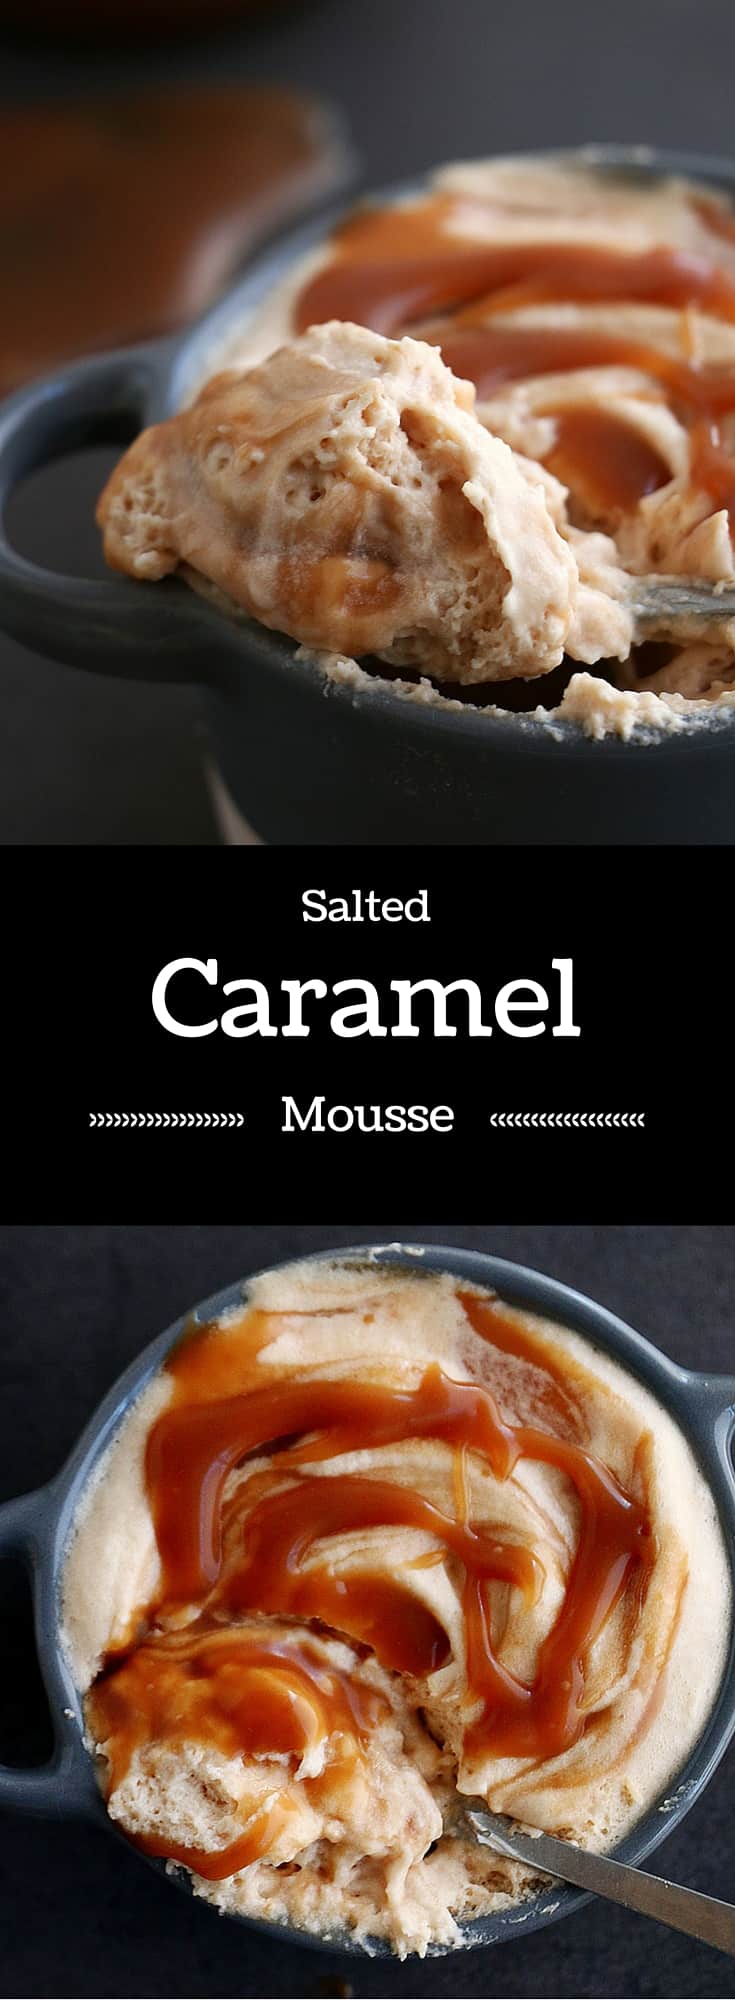 Creamy Salted Caramel Mousse images with a title.